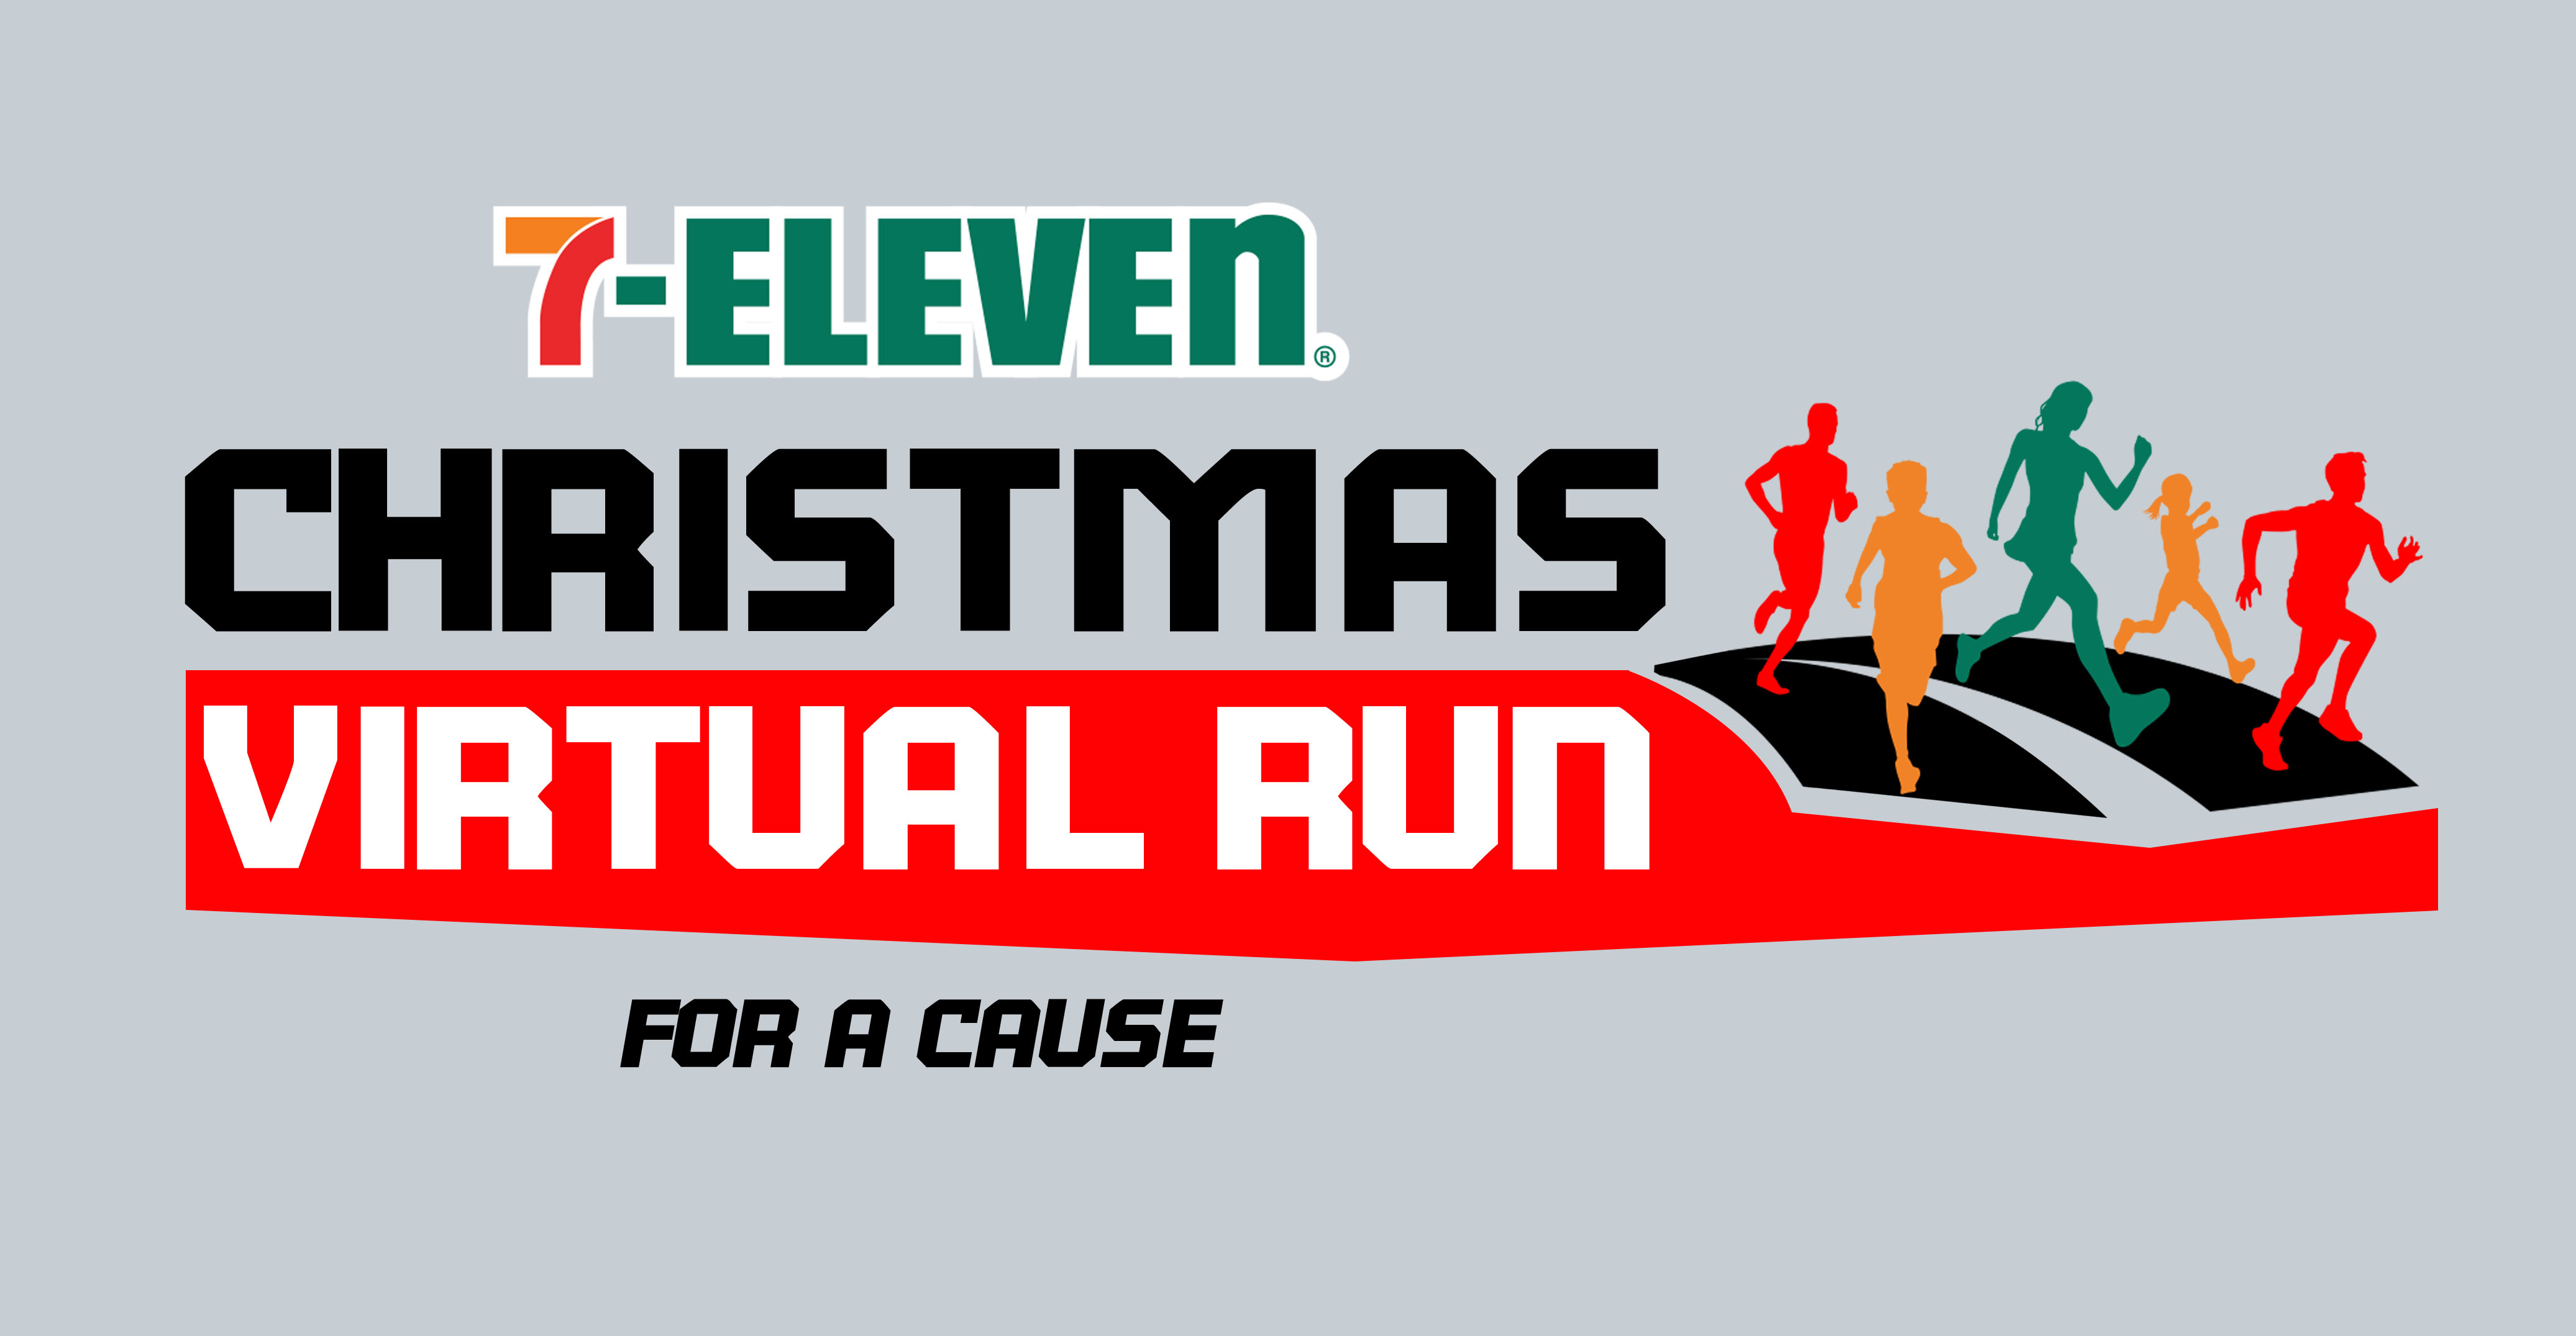 Smart powers 7-Eleven’s Christmas Virtual Run for a Cause